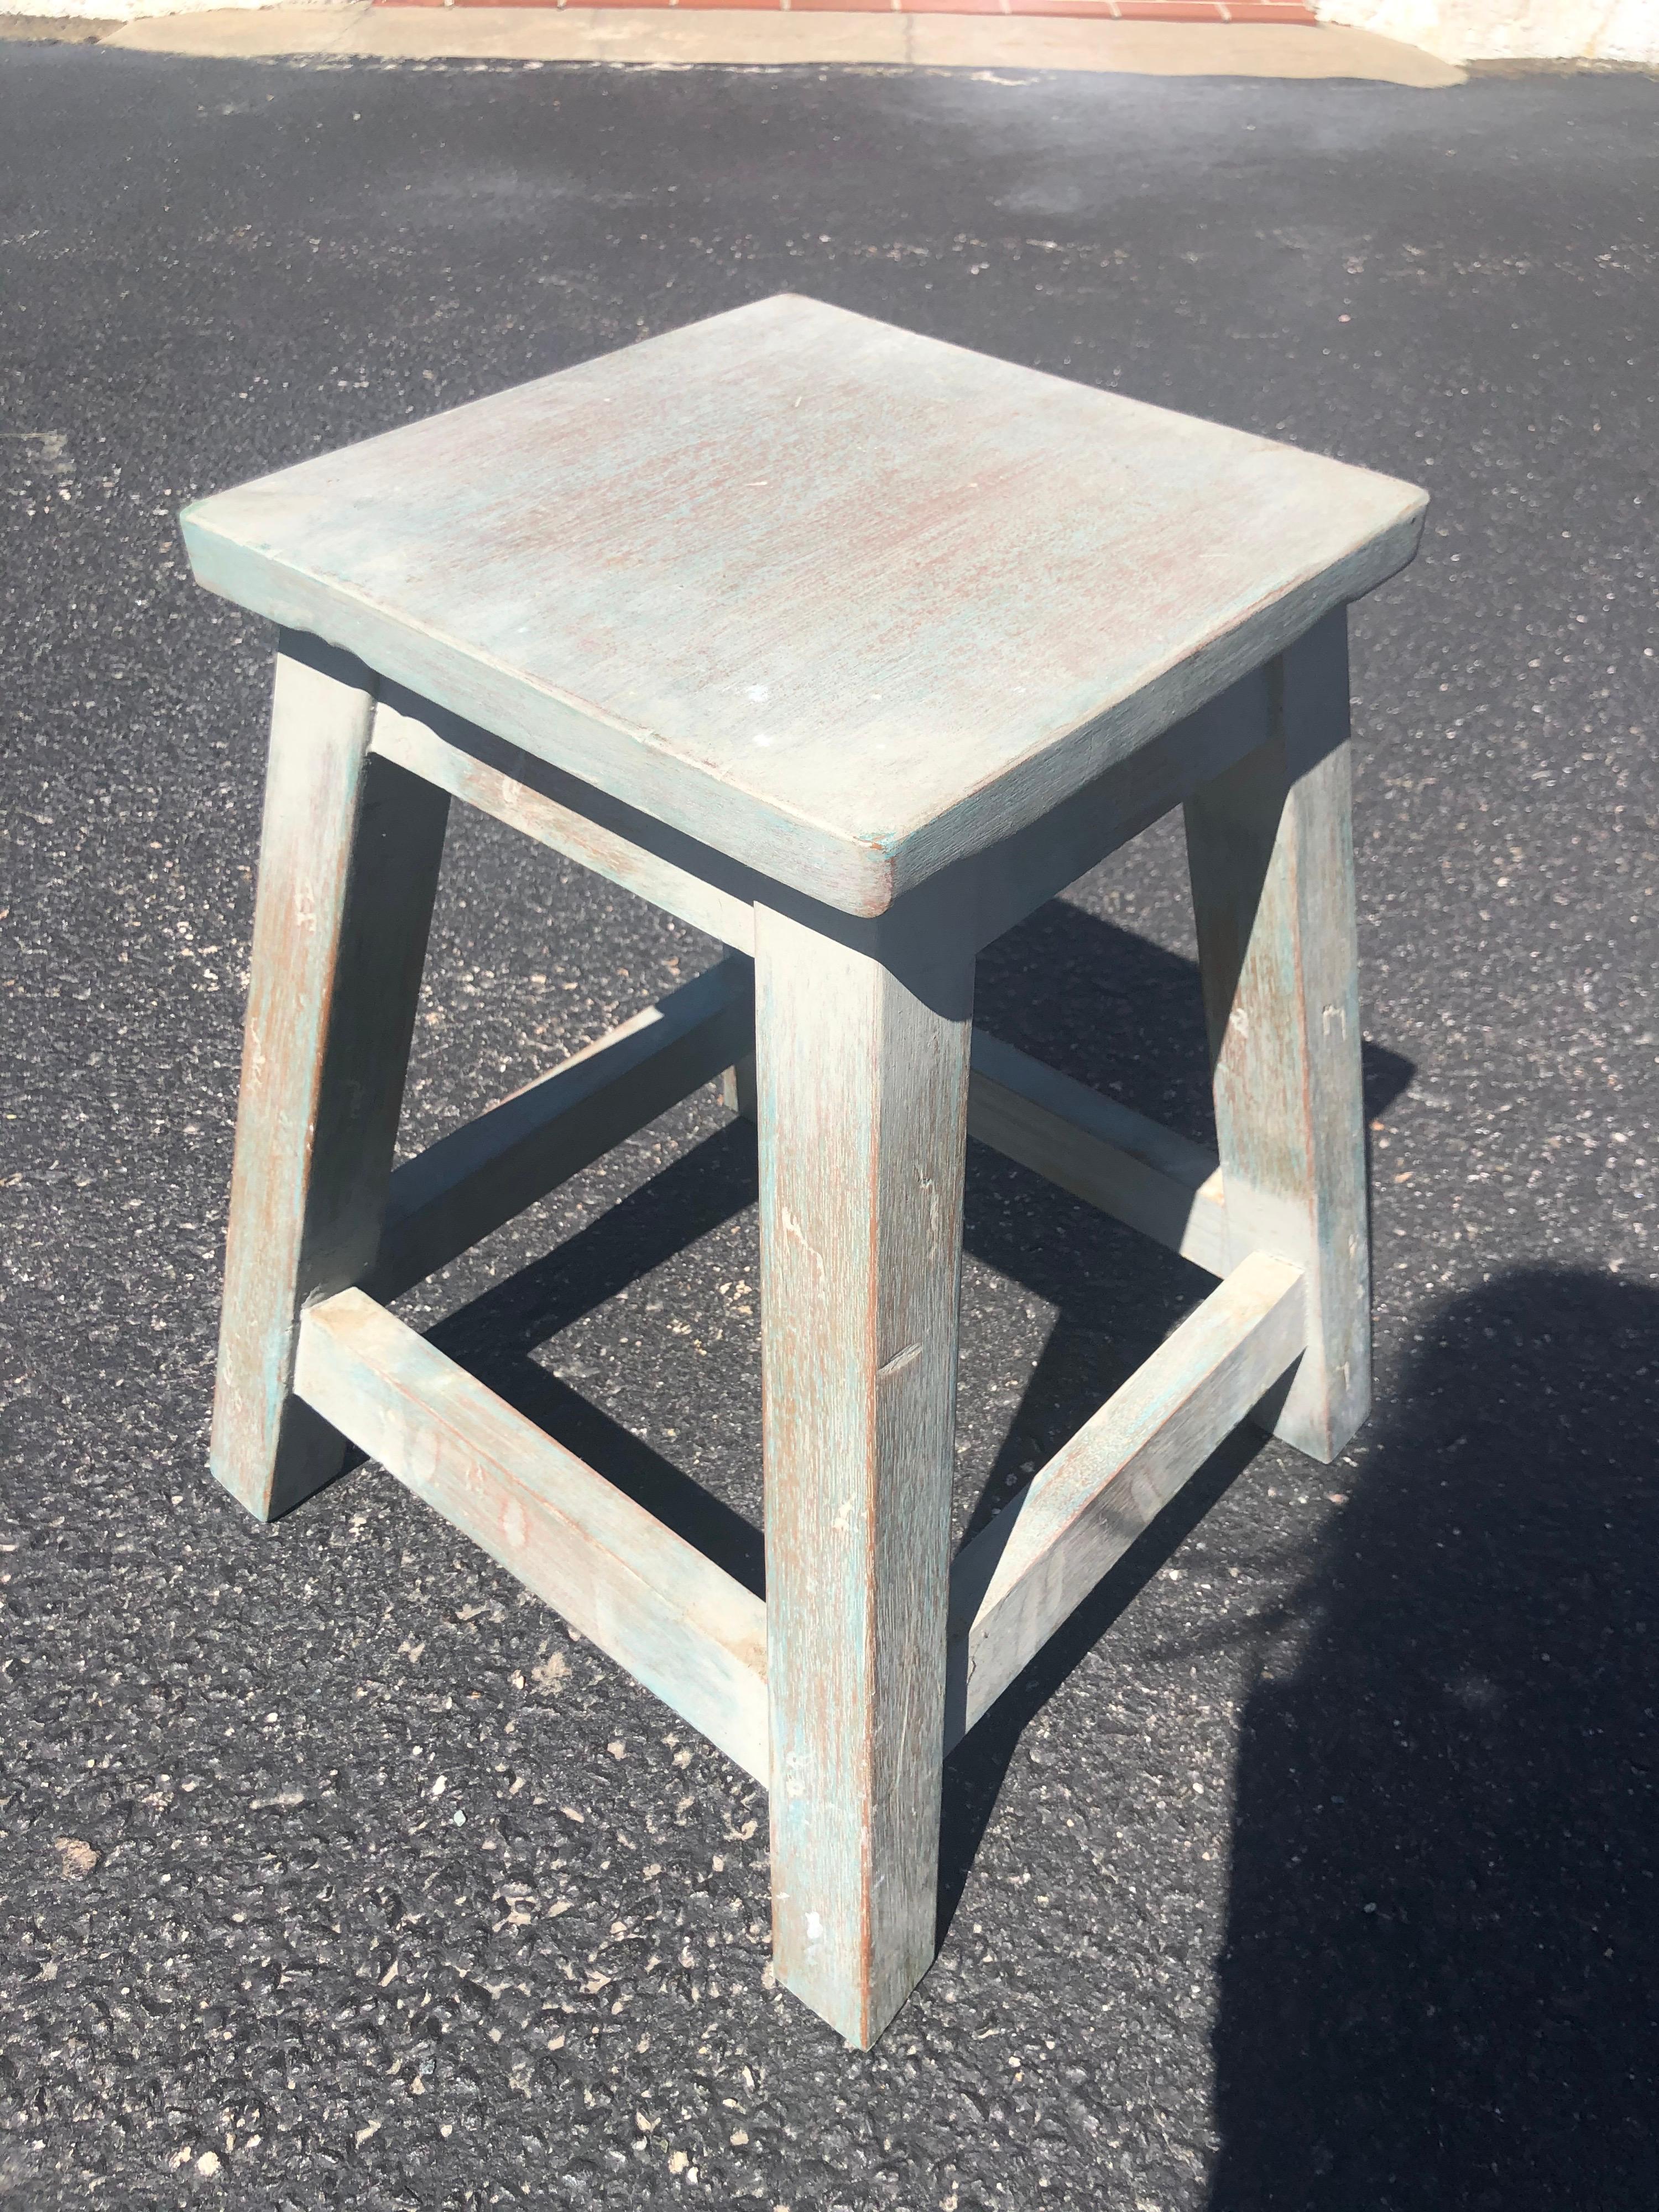 Painted pine stool or small table. Perfect for small spaces. Use as a stool or a small table.
Perfect for a childs room. Top measures 11